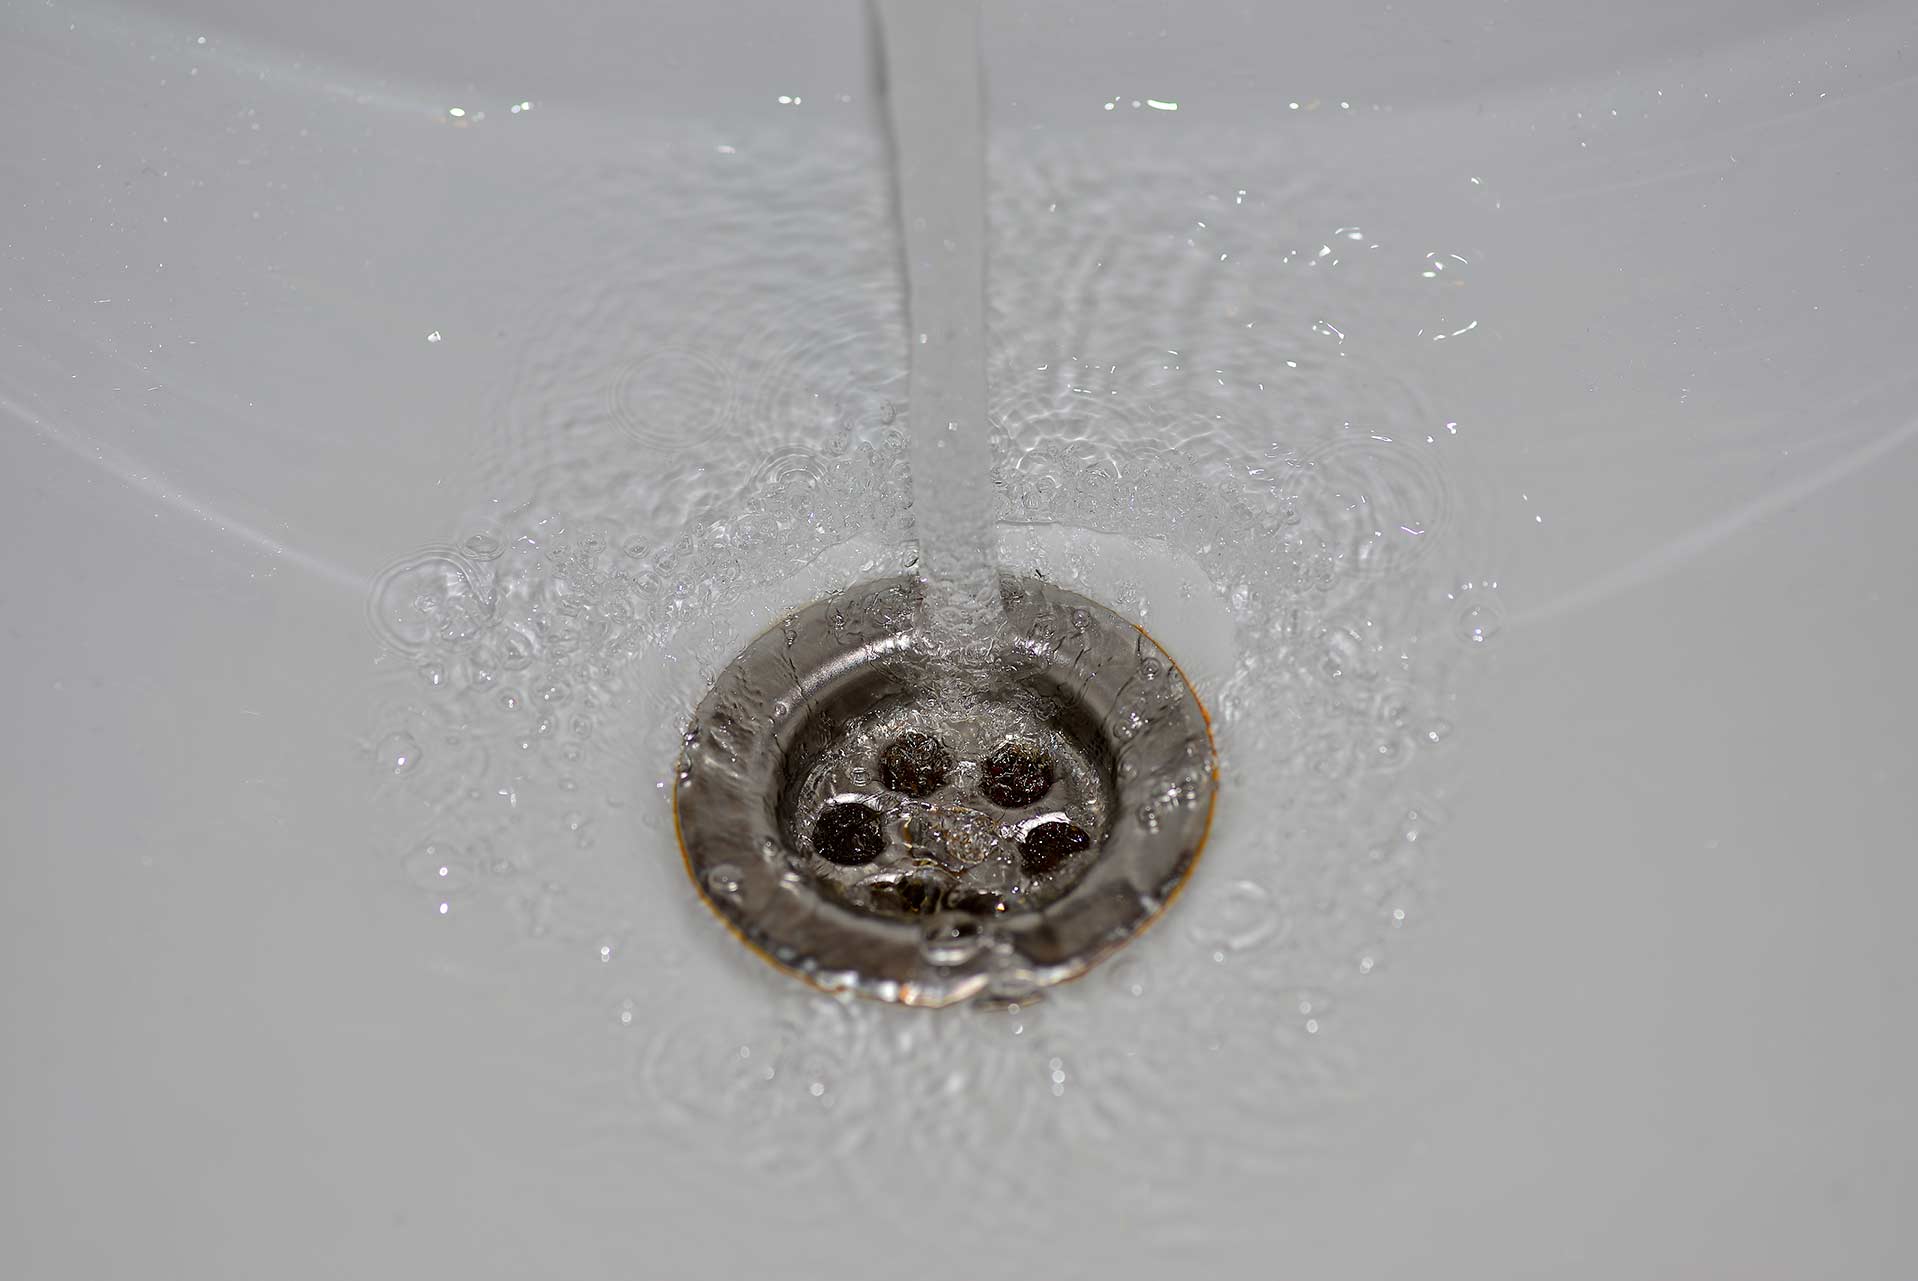 A2B Drains provides services to unblock blocked sinks and drains for properties in Stockport.